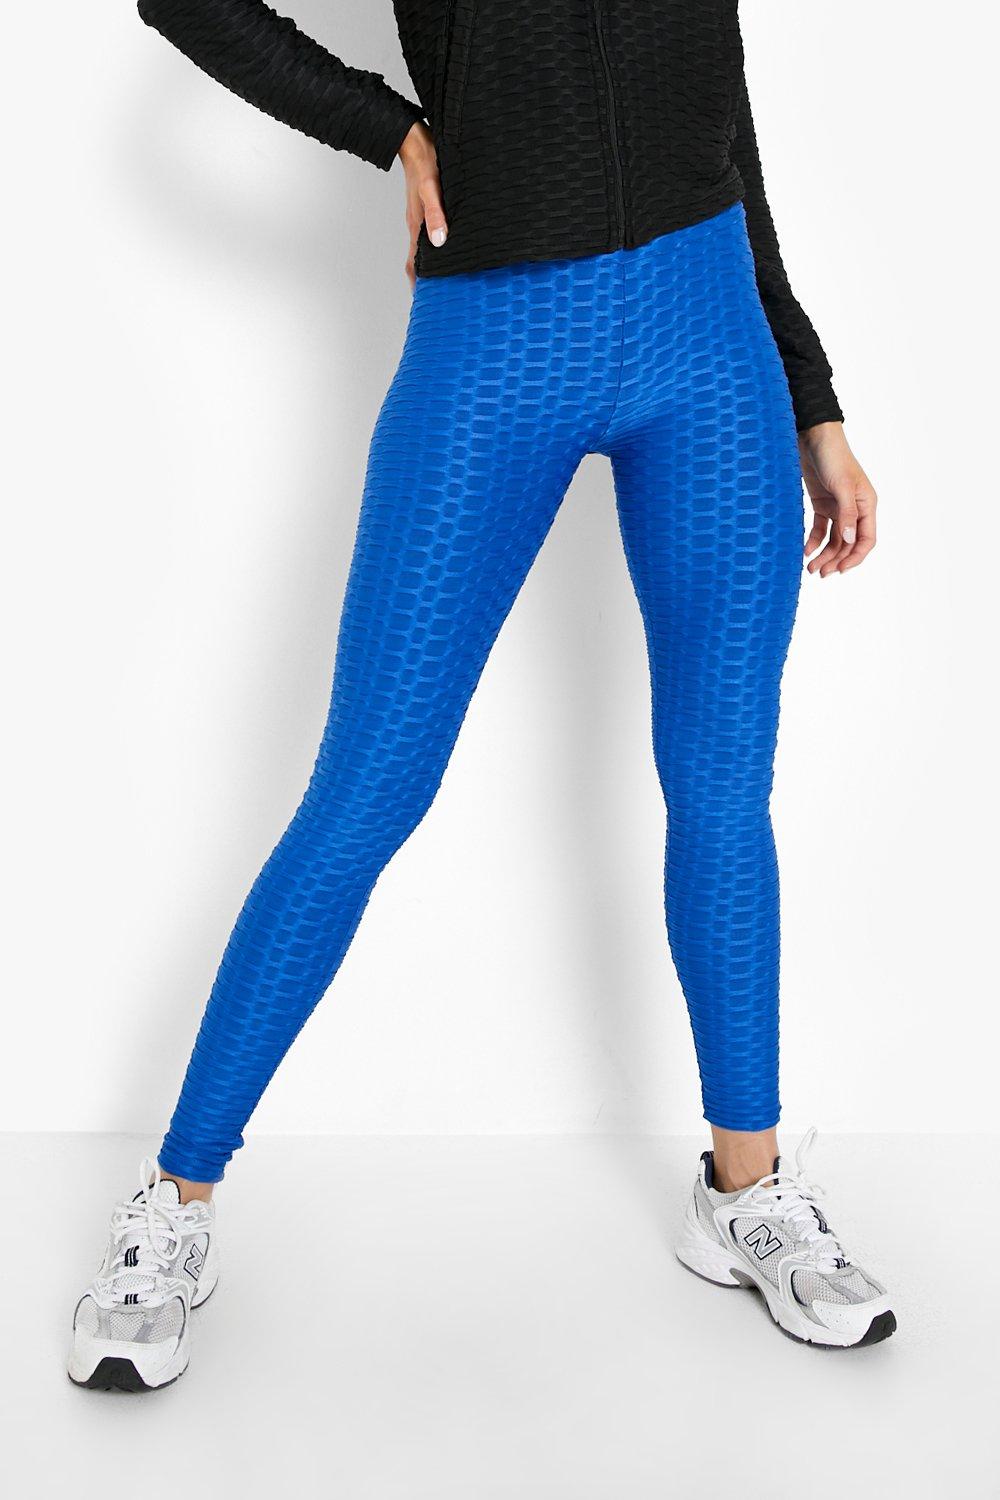 Dsgn Studio Sports Workout Leggings With Pocket